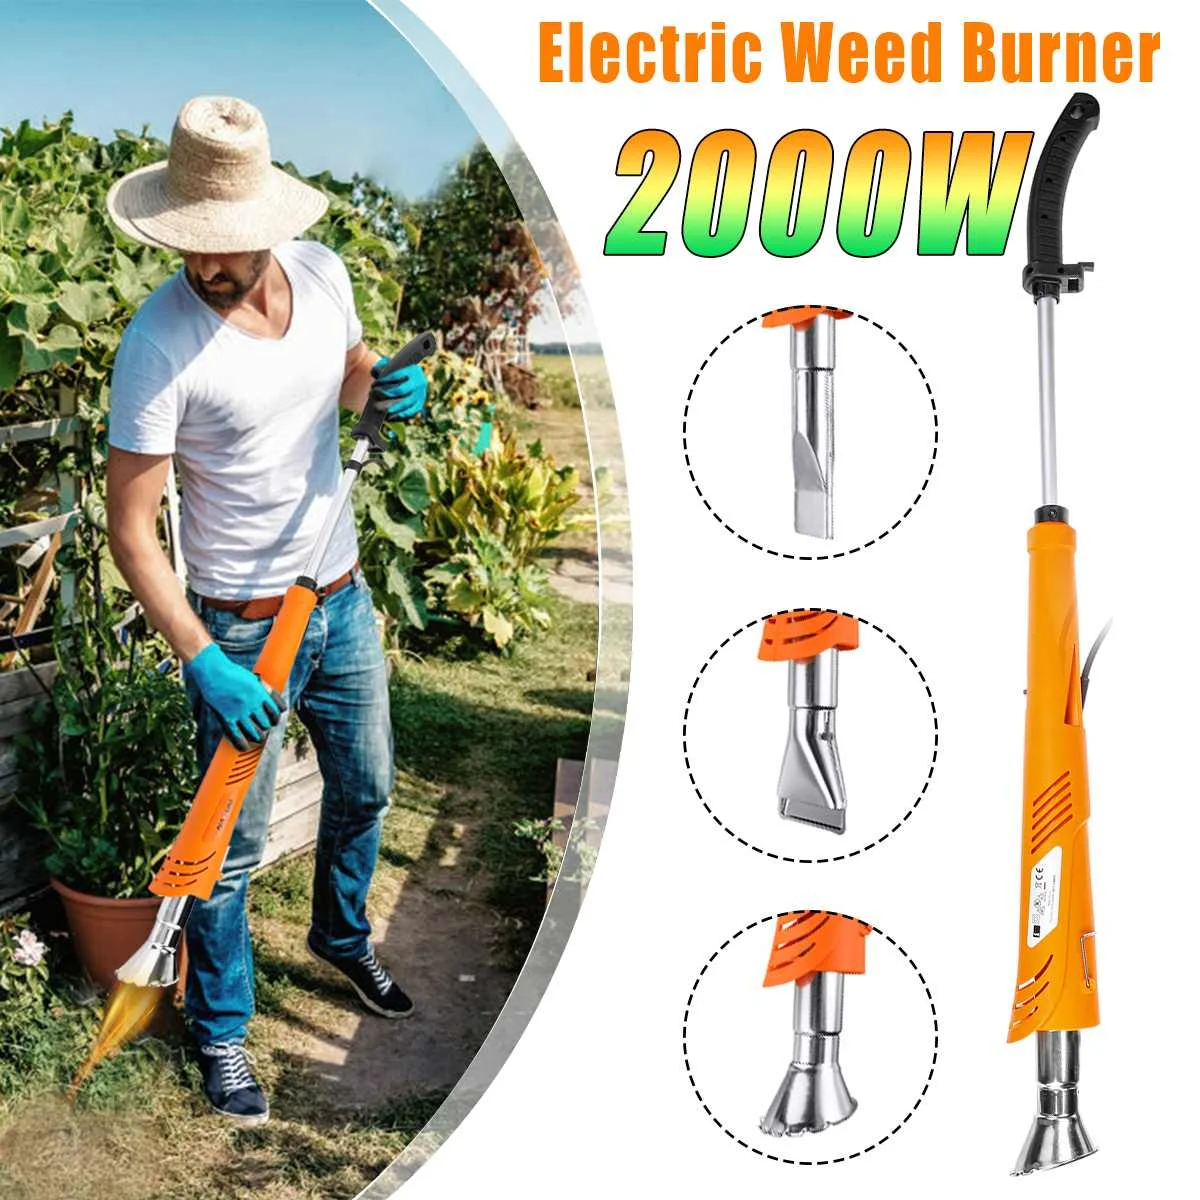 

2000W Electric Thermal Weeder 650° Hot Air Weed-Killer Grass Flamethrower Weed-Burner Of Garden Tools Grass Trimmer Lawn Mower